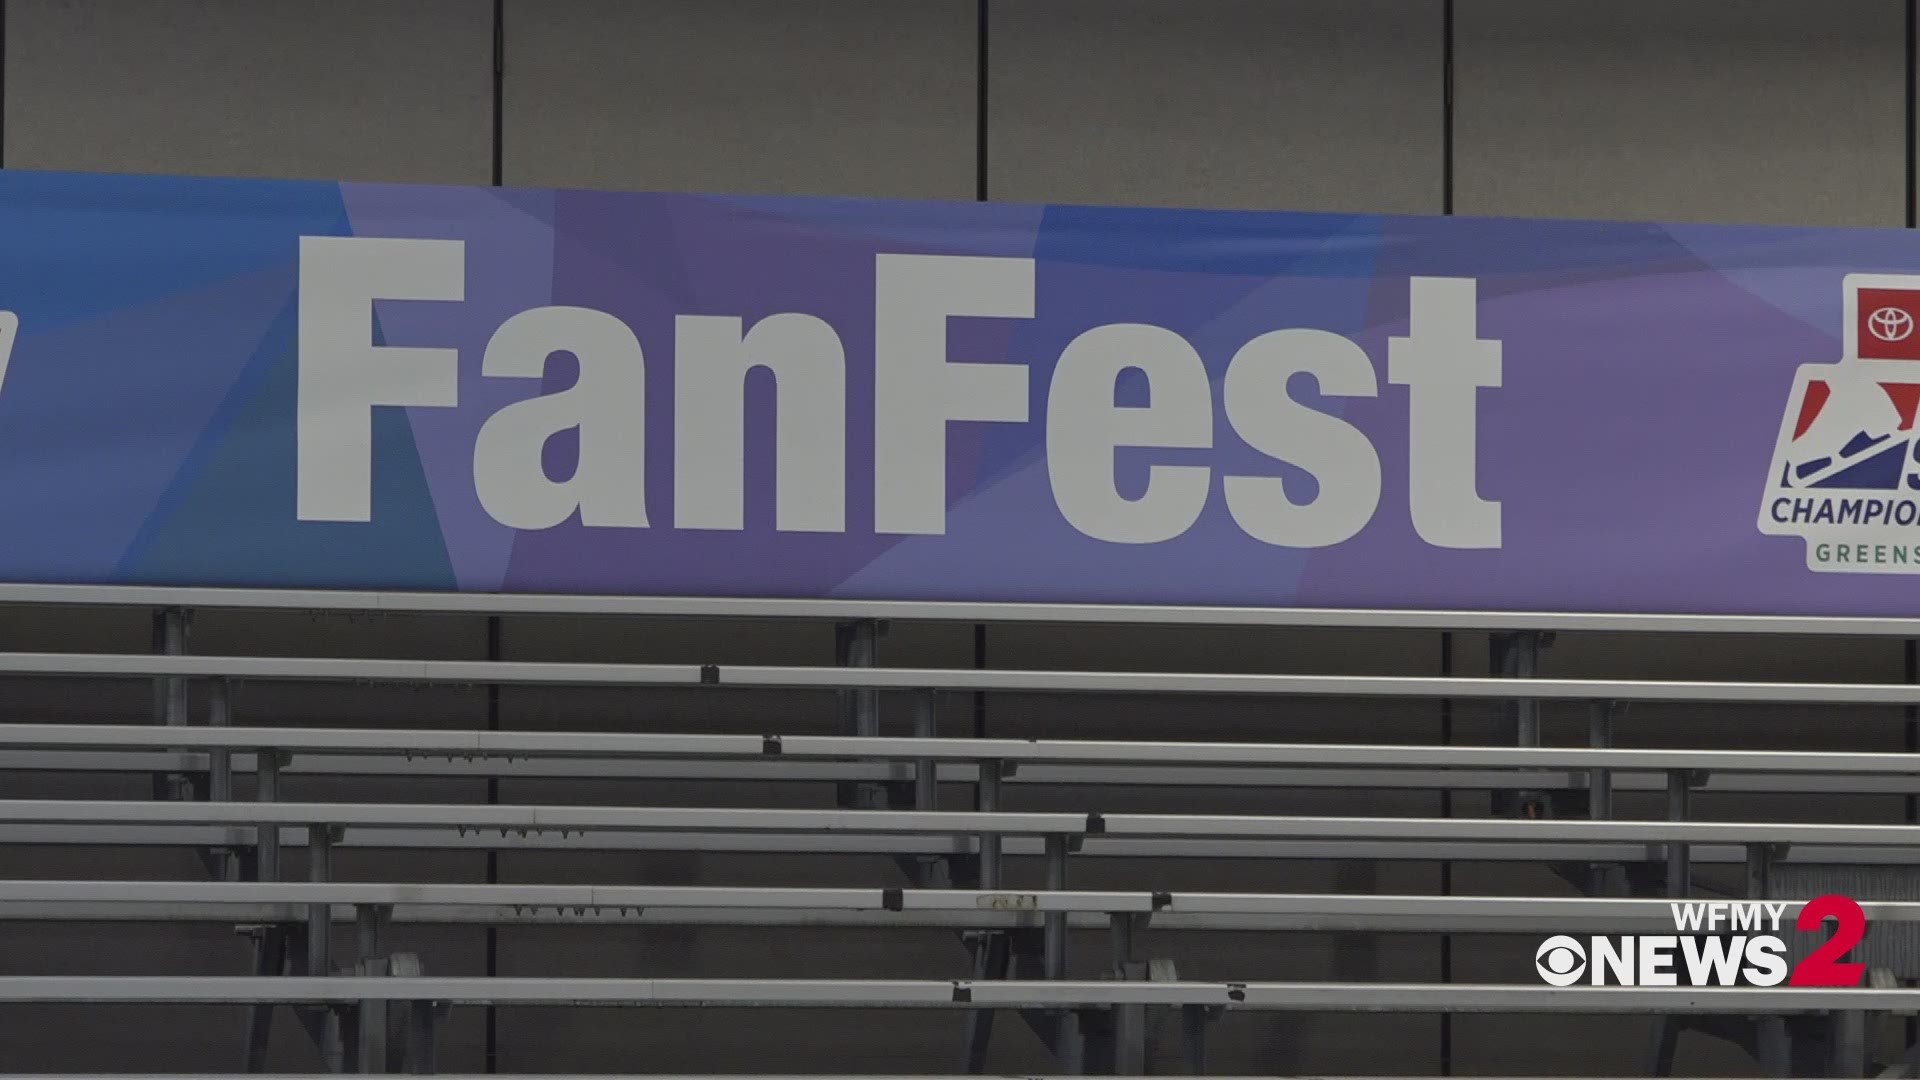 FanFest will include 20,000 feet of free interactive games, live music, contests, entertainment and a mini-sheet of ice for exhibitions and medalist ceremonies.